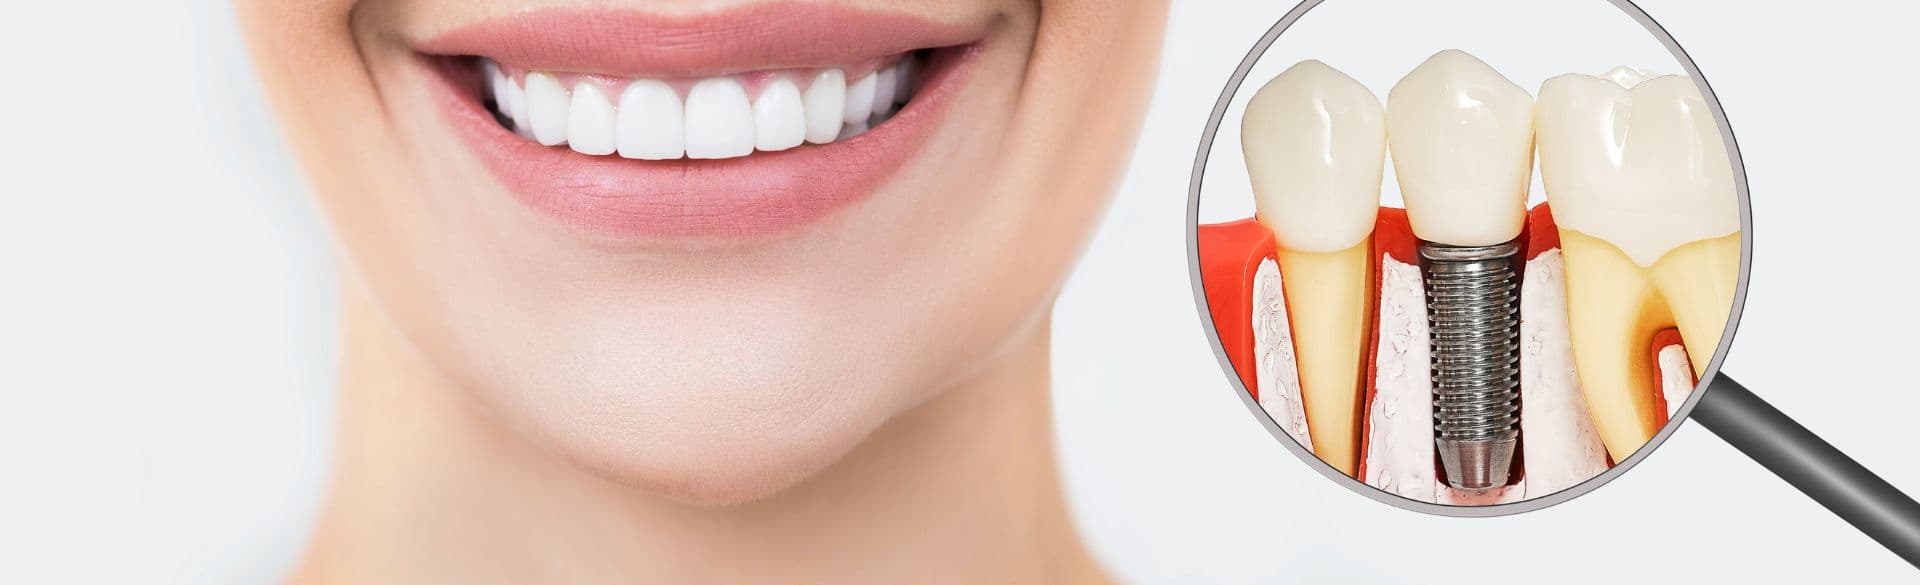 How Teeth and Implants Work Together for a Healthy Smile